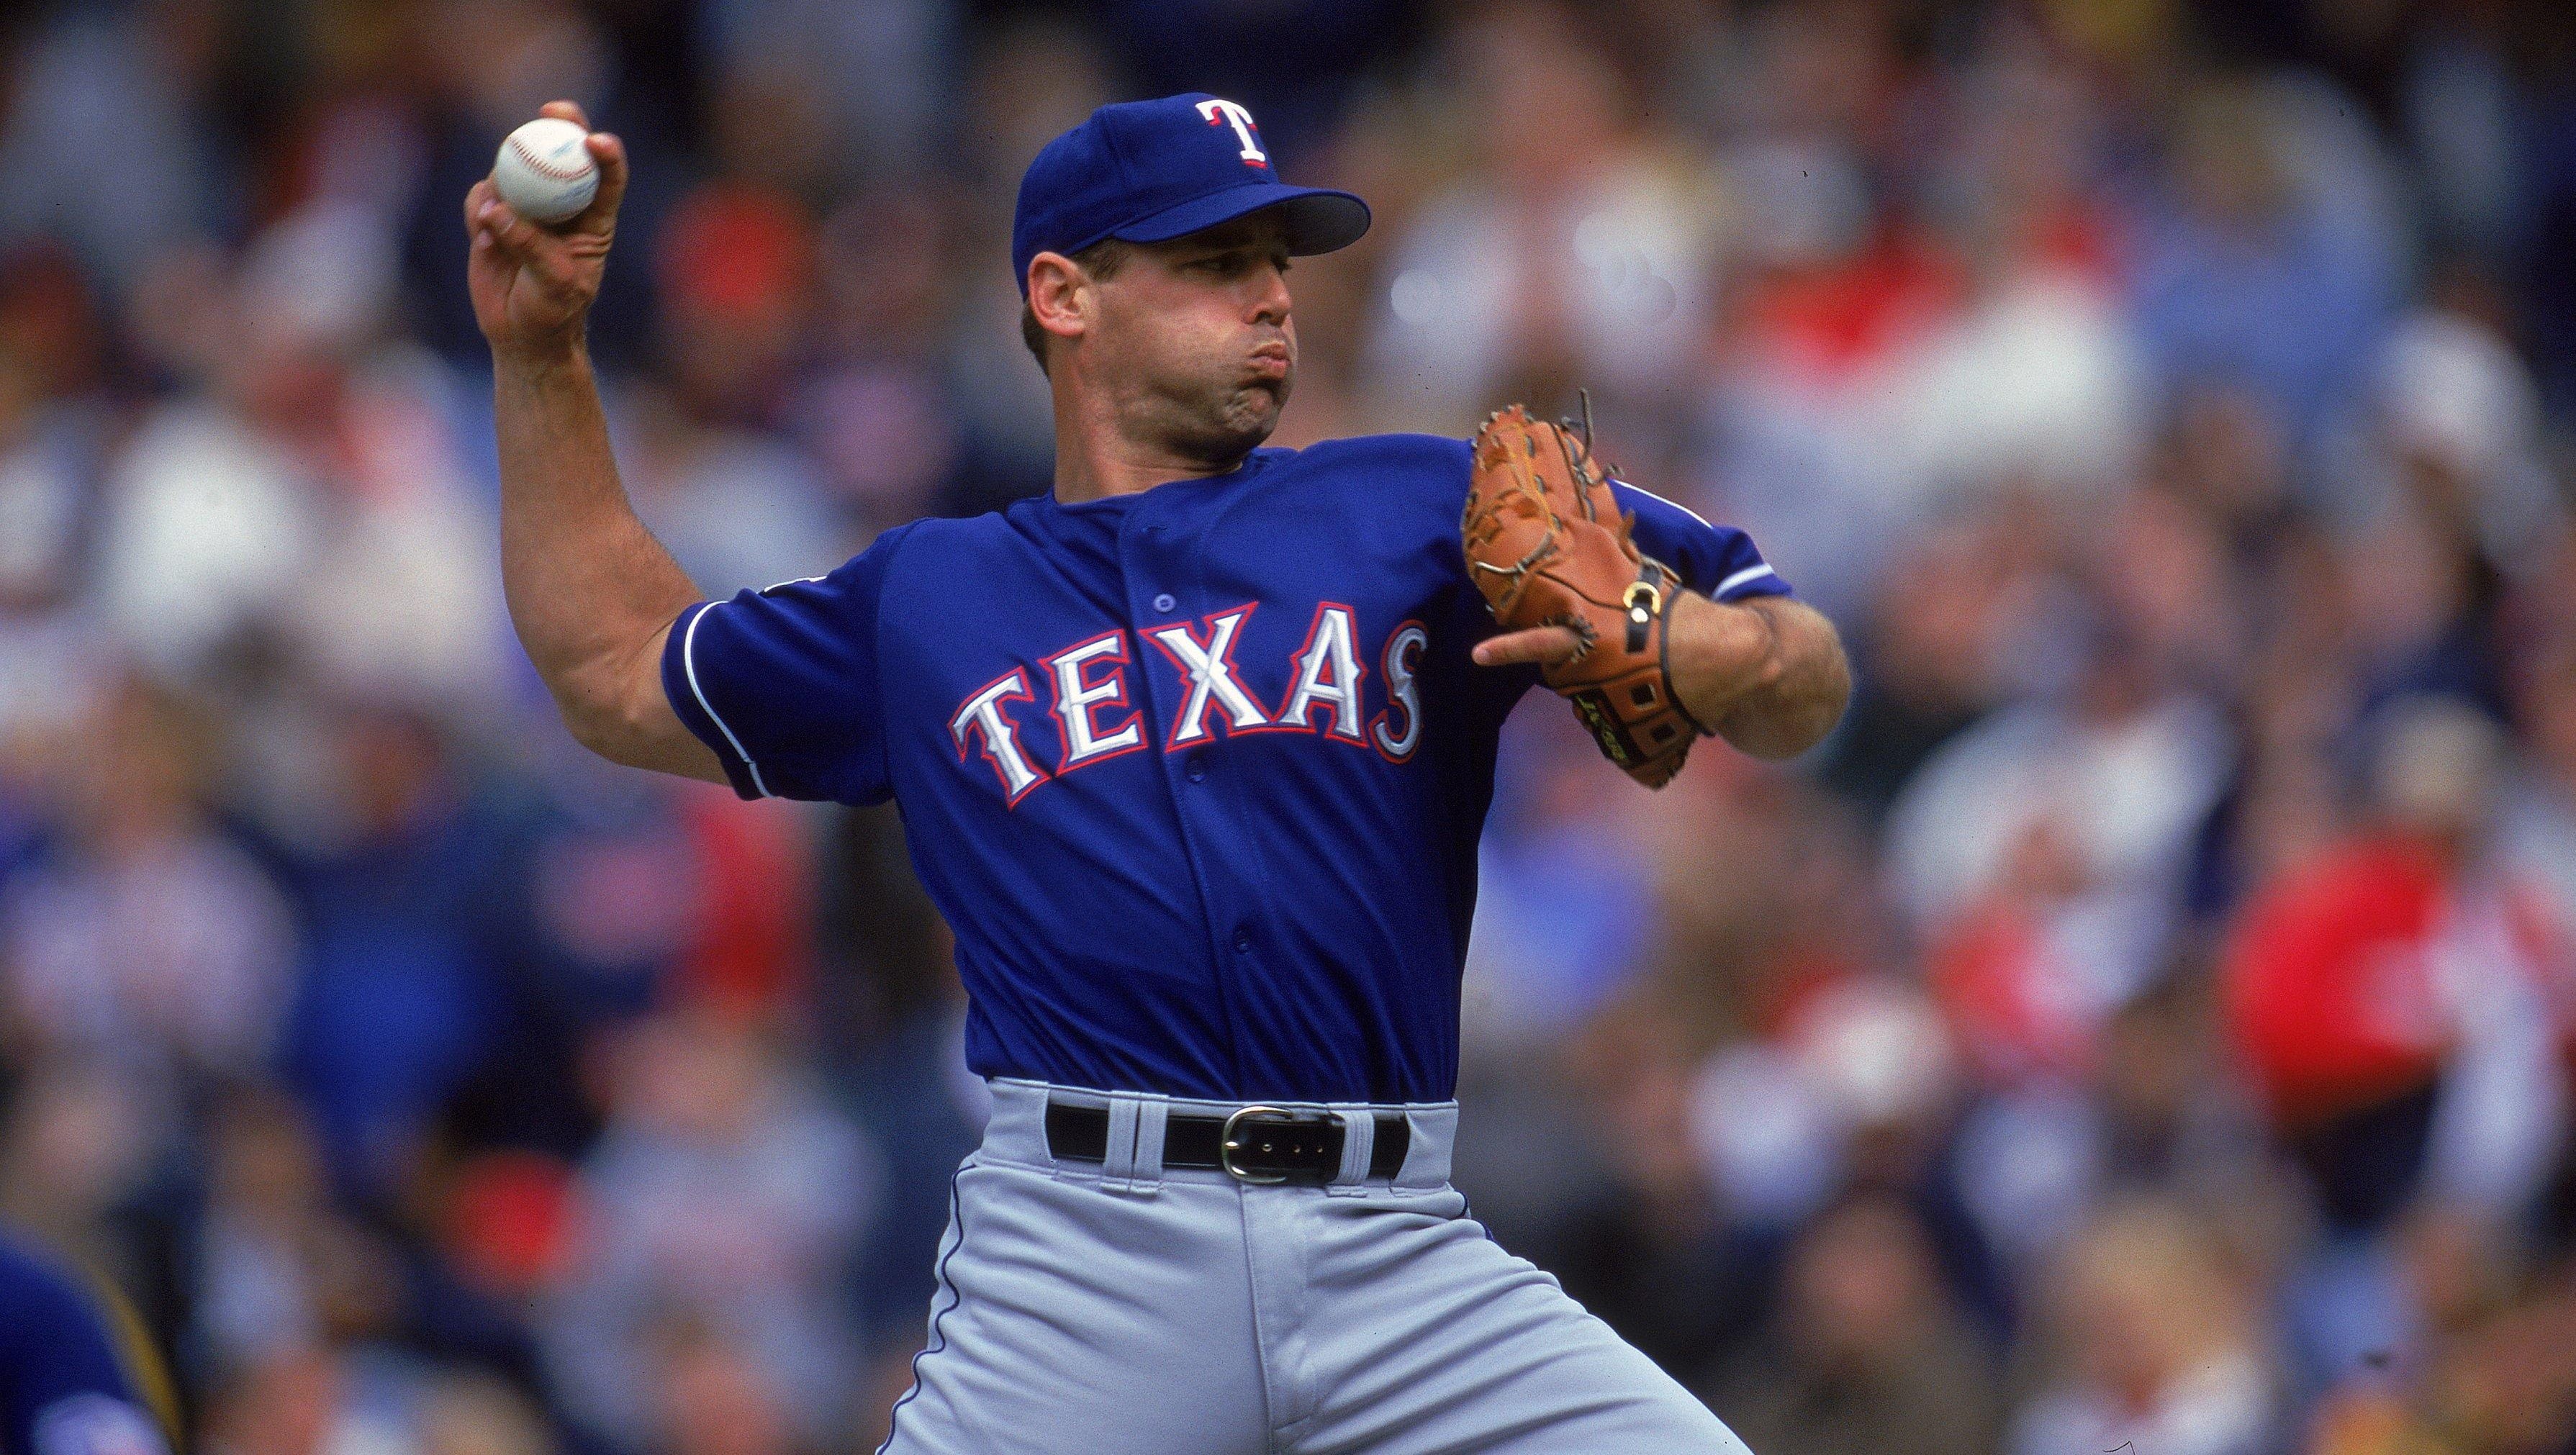 Former closer John Wetteland was arrested Monday on charges of sexual abuse of a child, according to records at the Denton County, Texas, jail.